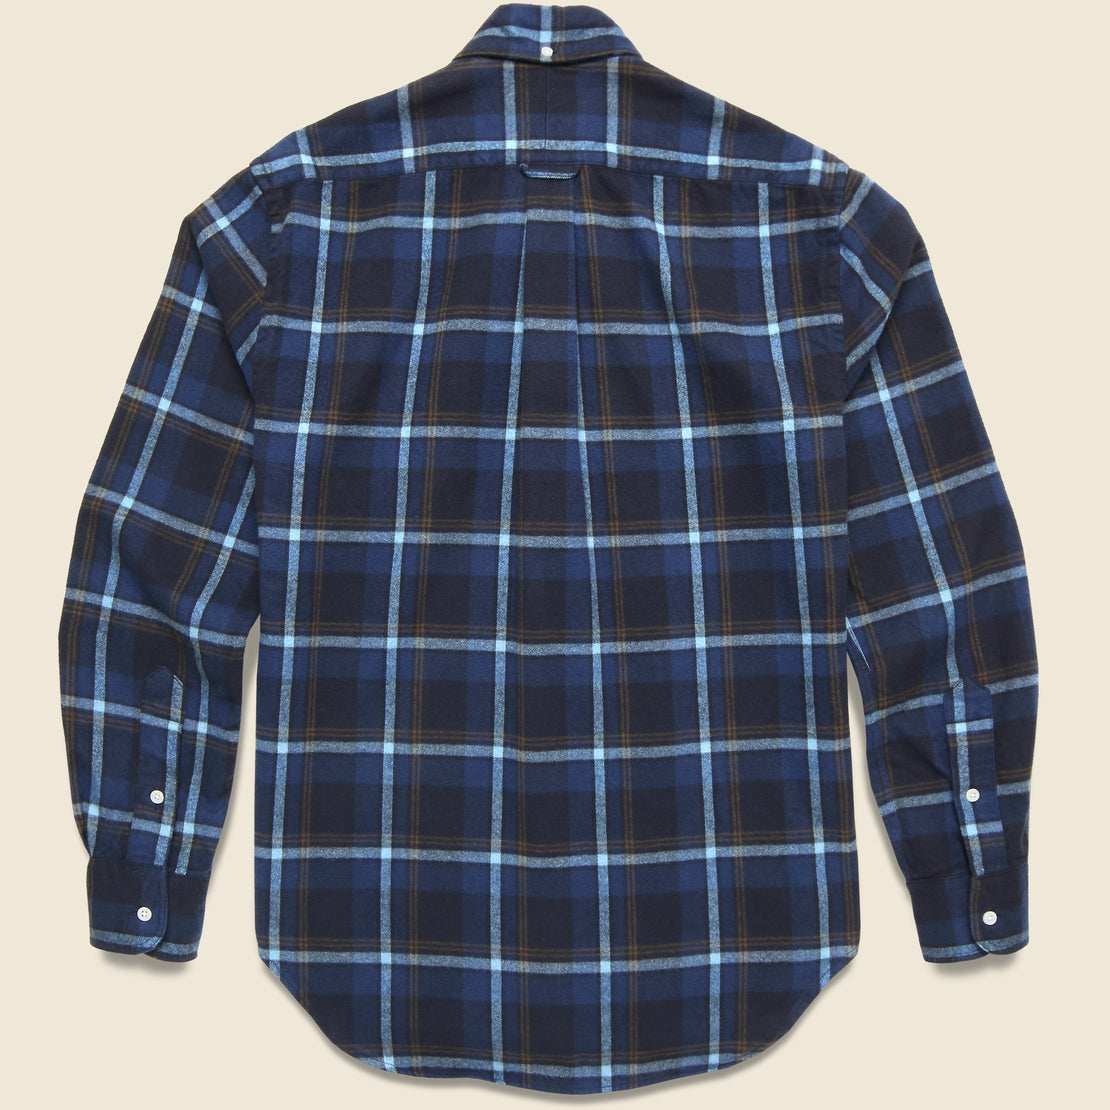 Shaggy Check Flannel - Blue - Gitman Vintage - STAG Provisions - Tops - L/S Woven - Plaid